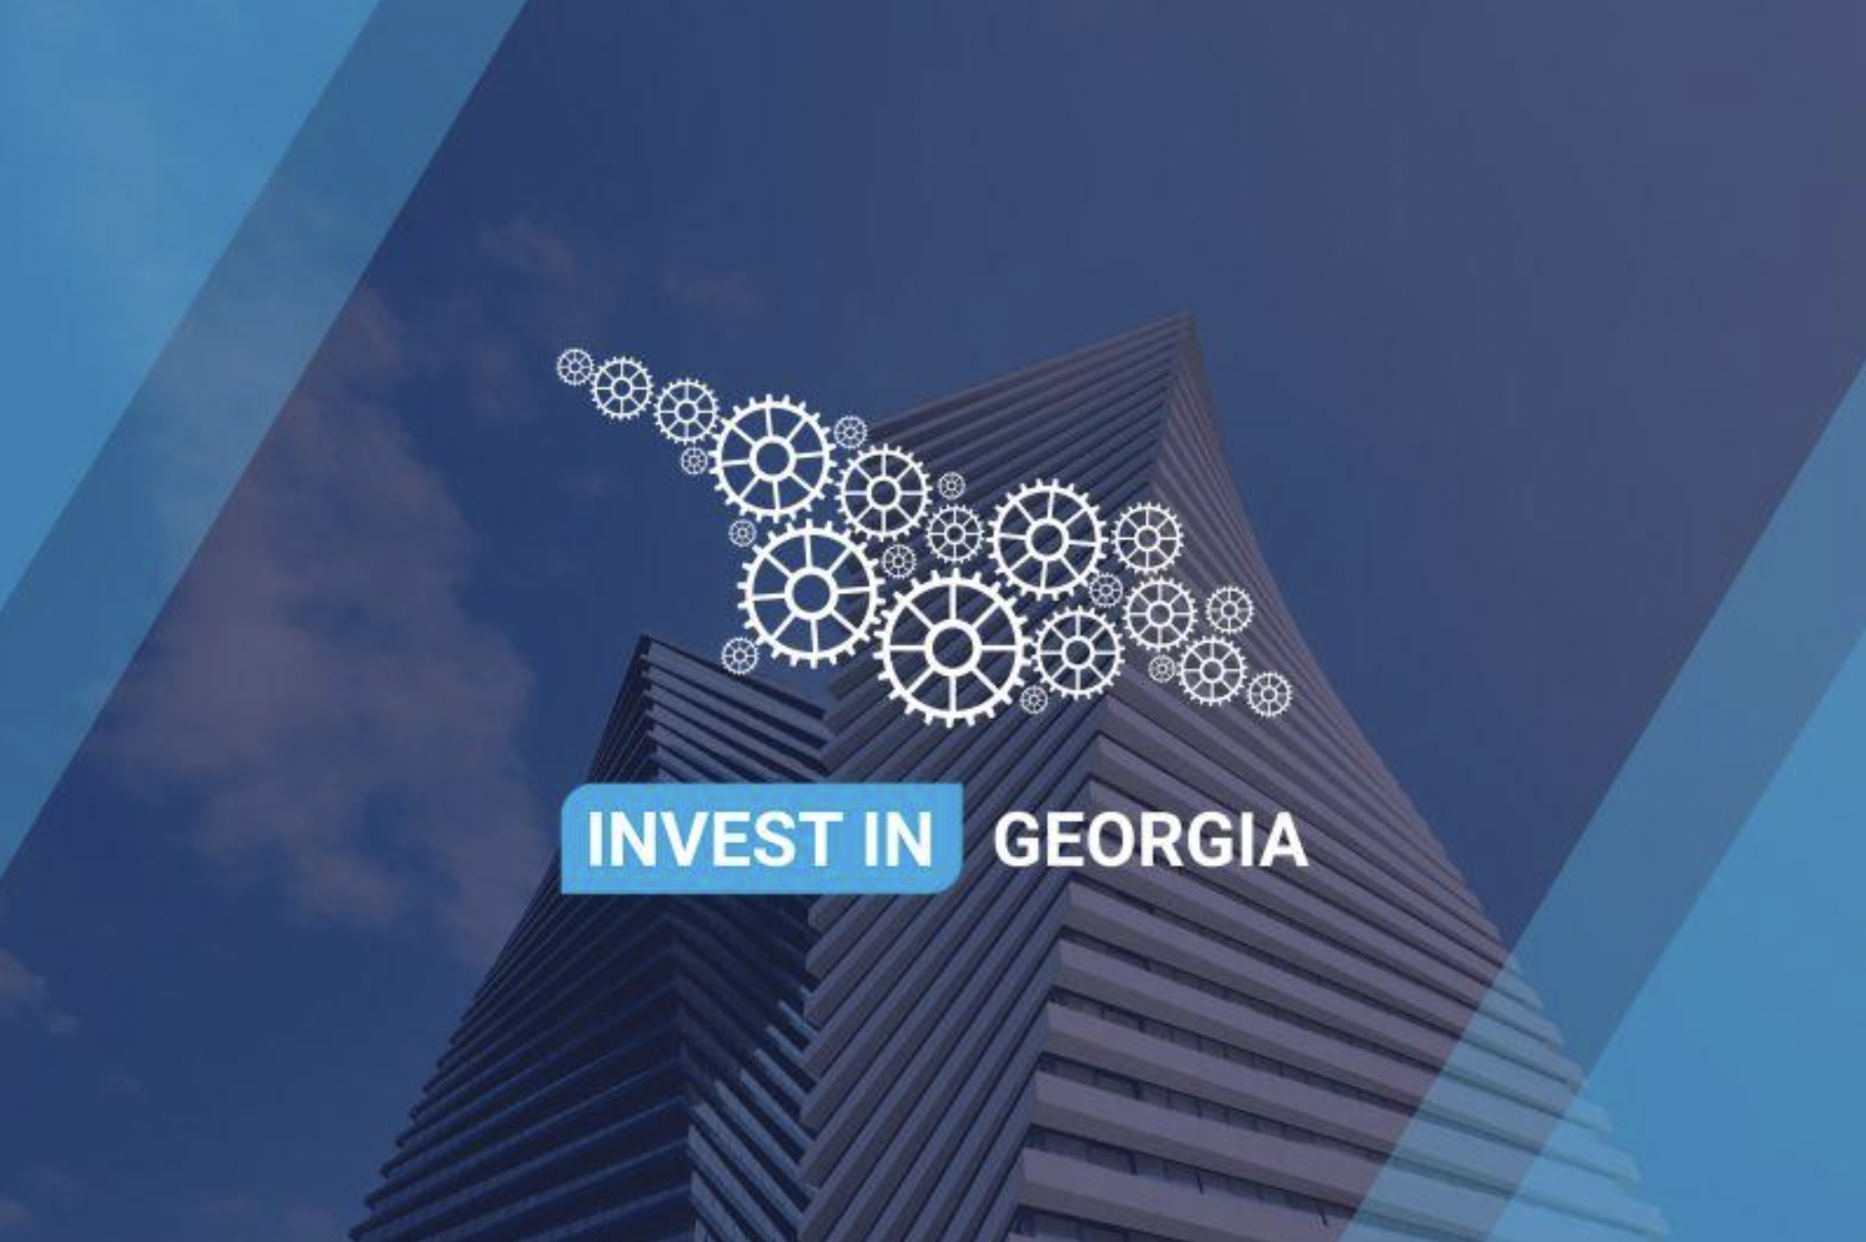 Going Strong! Georgia Posts Strong Economic Growth For First 10 Months.